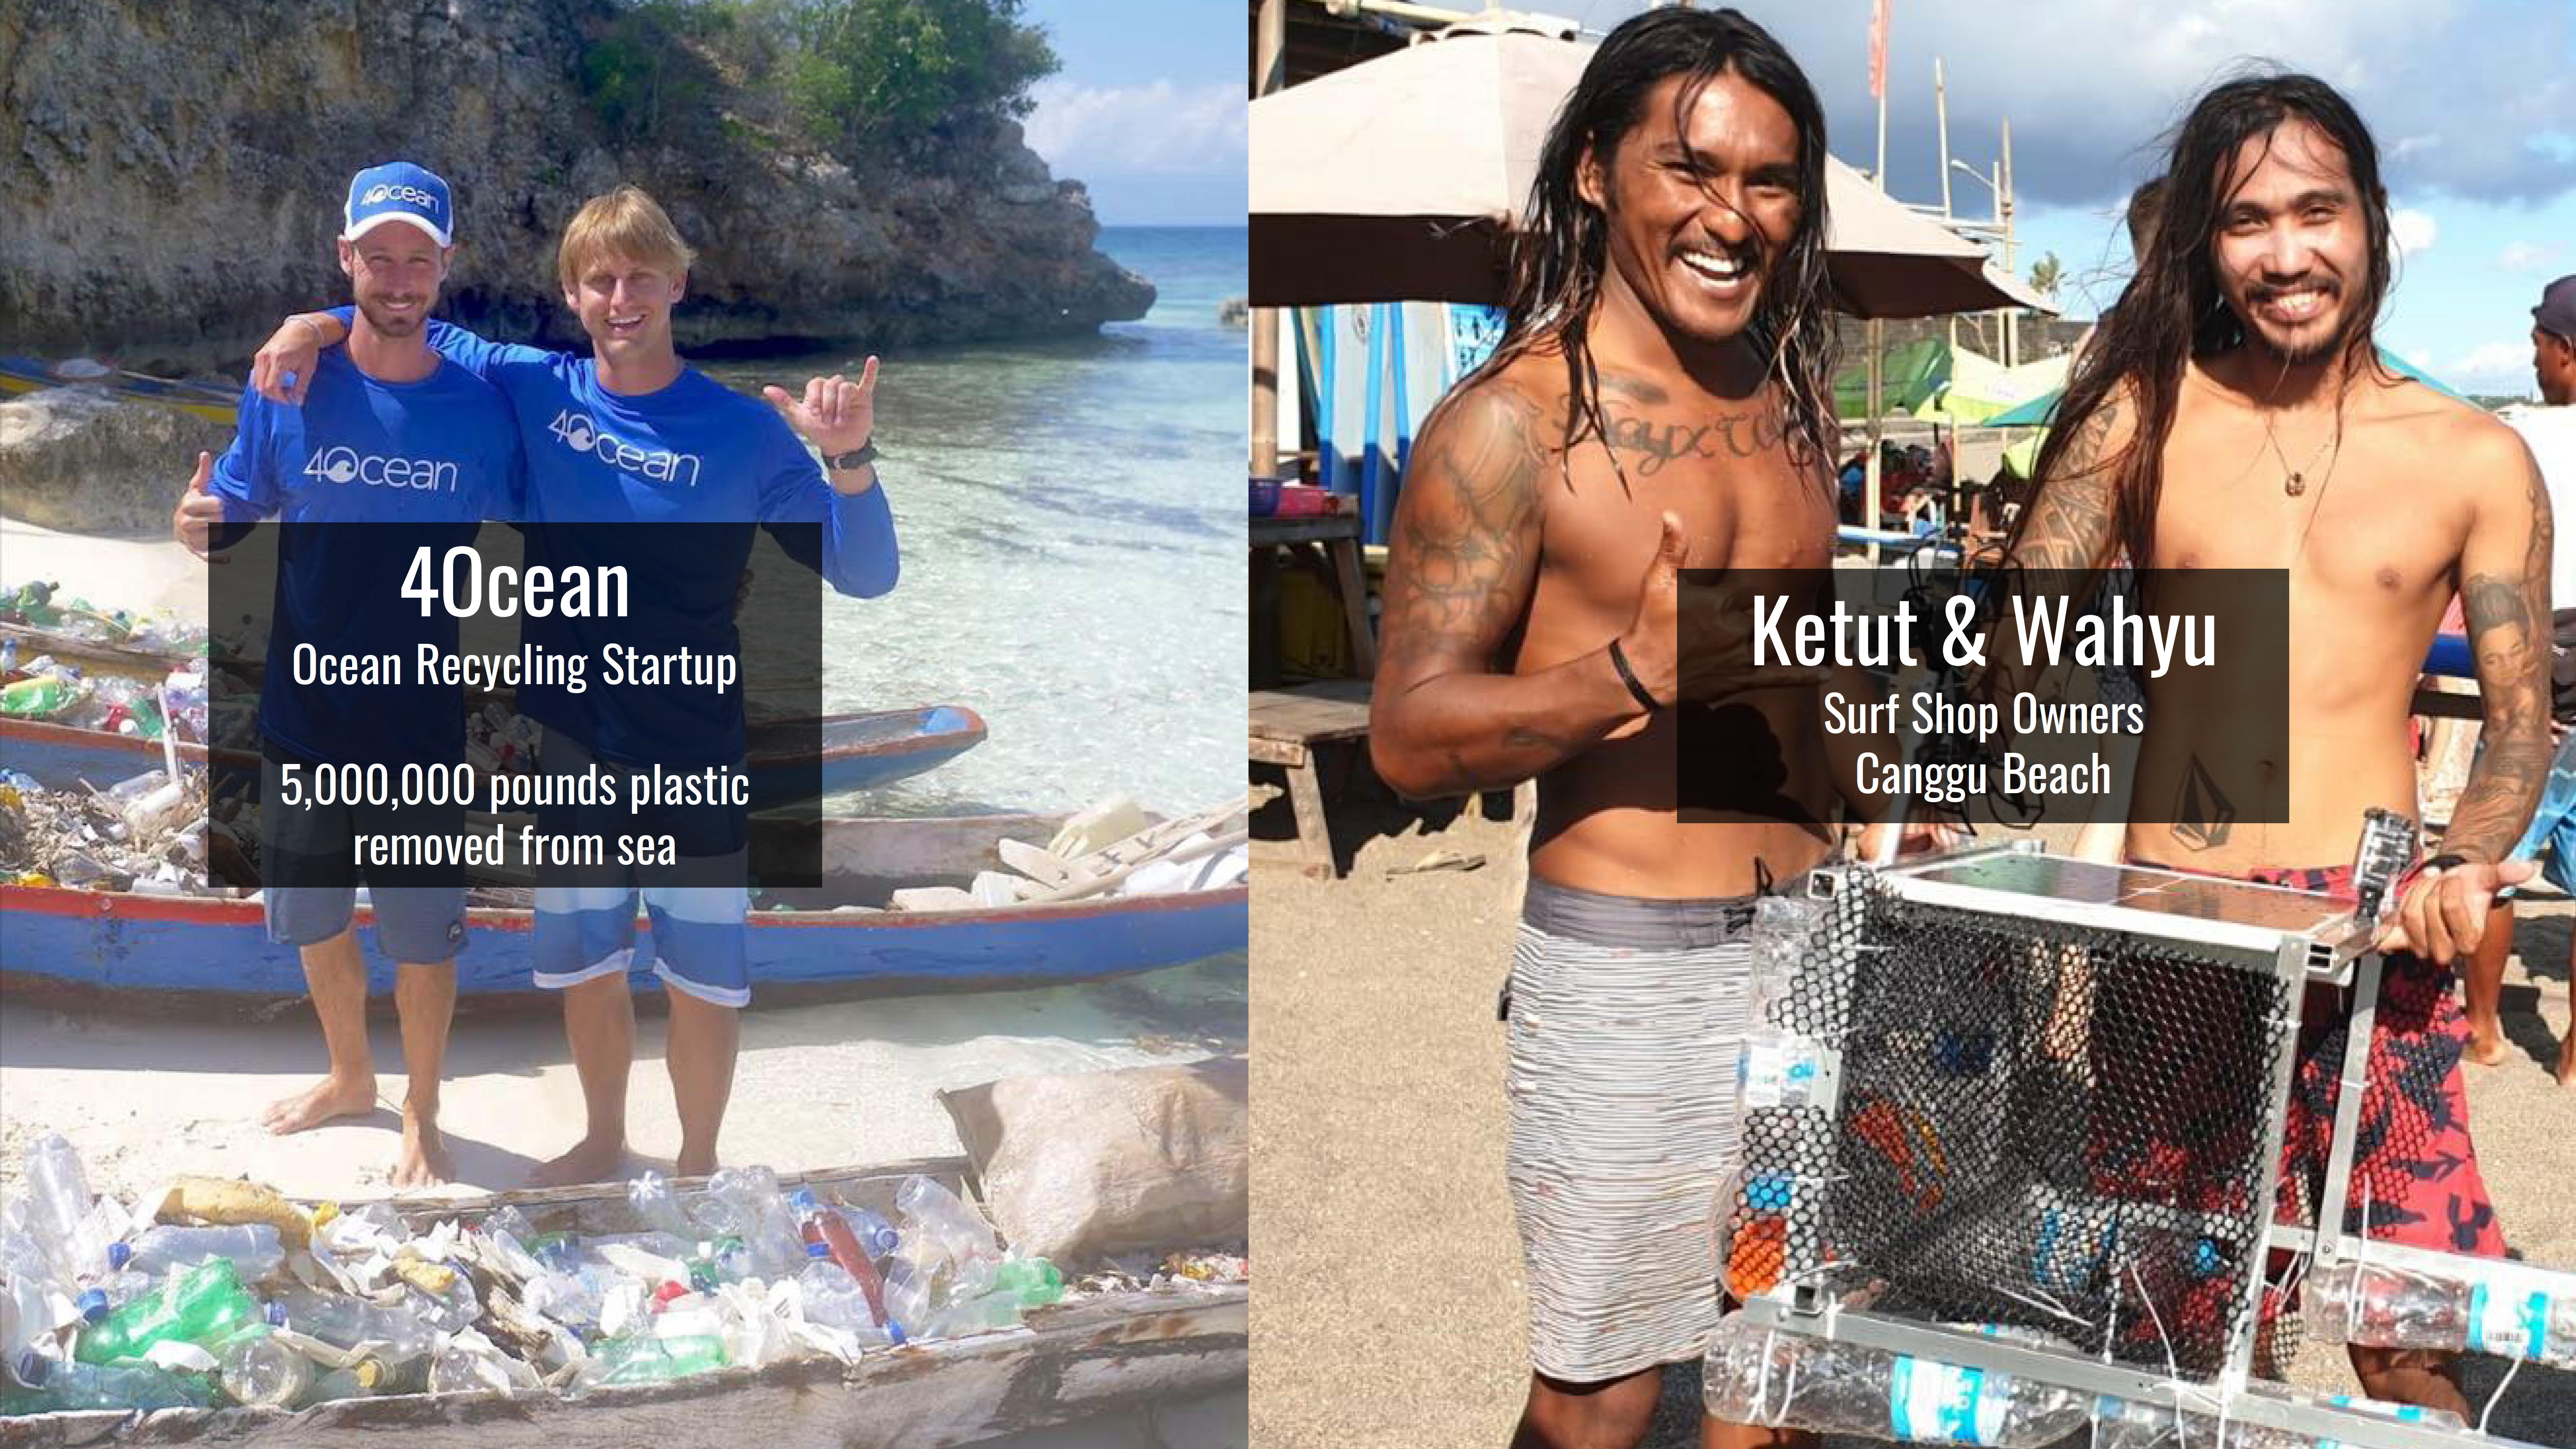 On the left are Alex and Andrew of 4ocean, who have cleaned a mammoth 5 million pounds of ocean plastic in just 2 years. And on the right are Ketut and Wahyu, who belong to the community of volunteers who clean the Canggu beach every morning on their surfboards. Now this burgeoning startup and this indigenous community, both collect ocean waste with small nets and their bare hands. And we felt that ClearBot could really scale up their efforts.